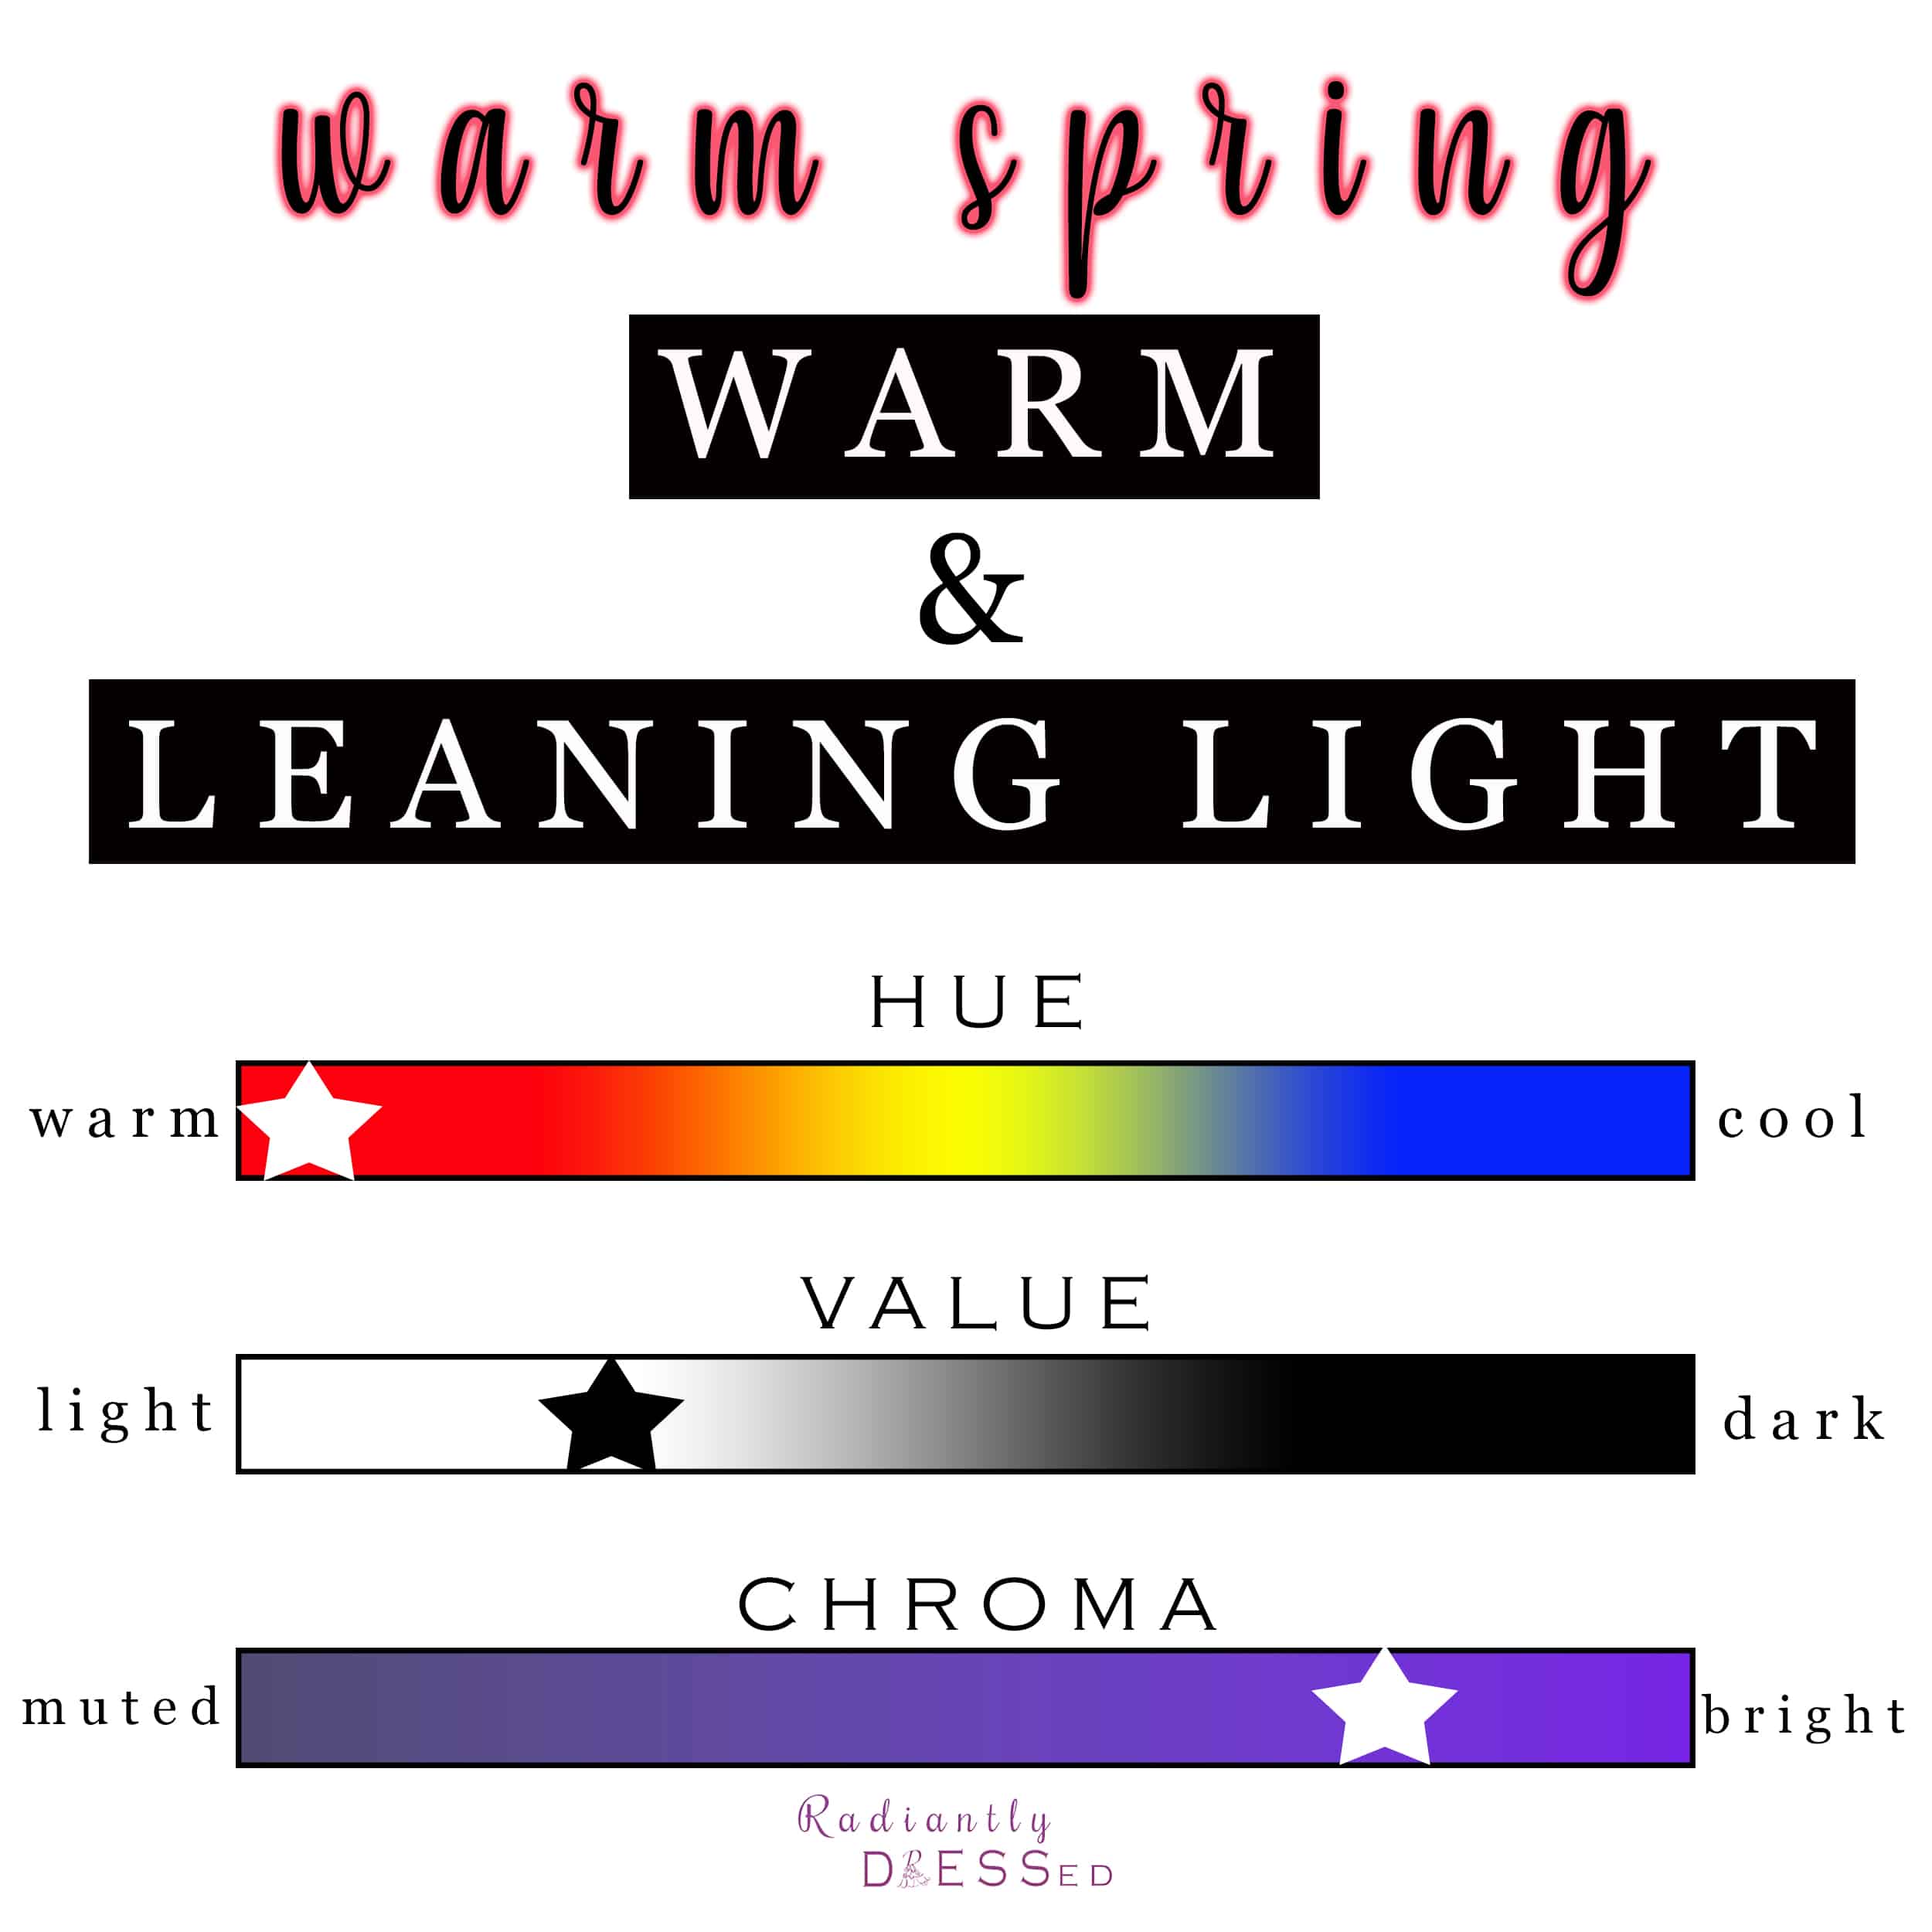 Warm spring is overall very warm, leaning light.